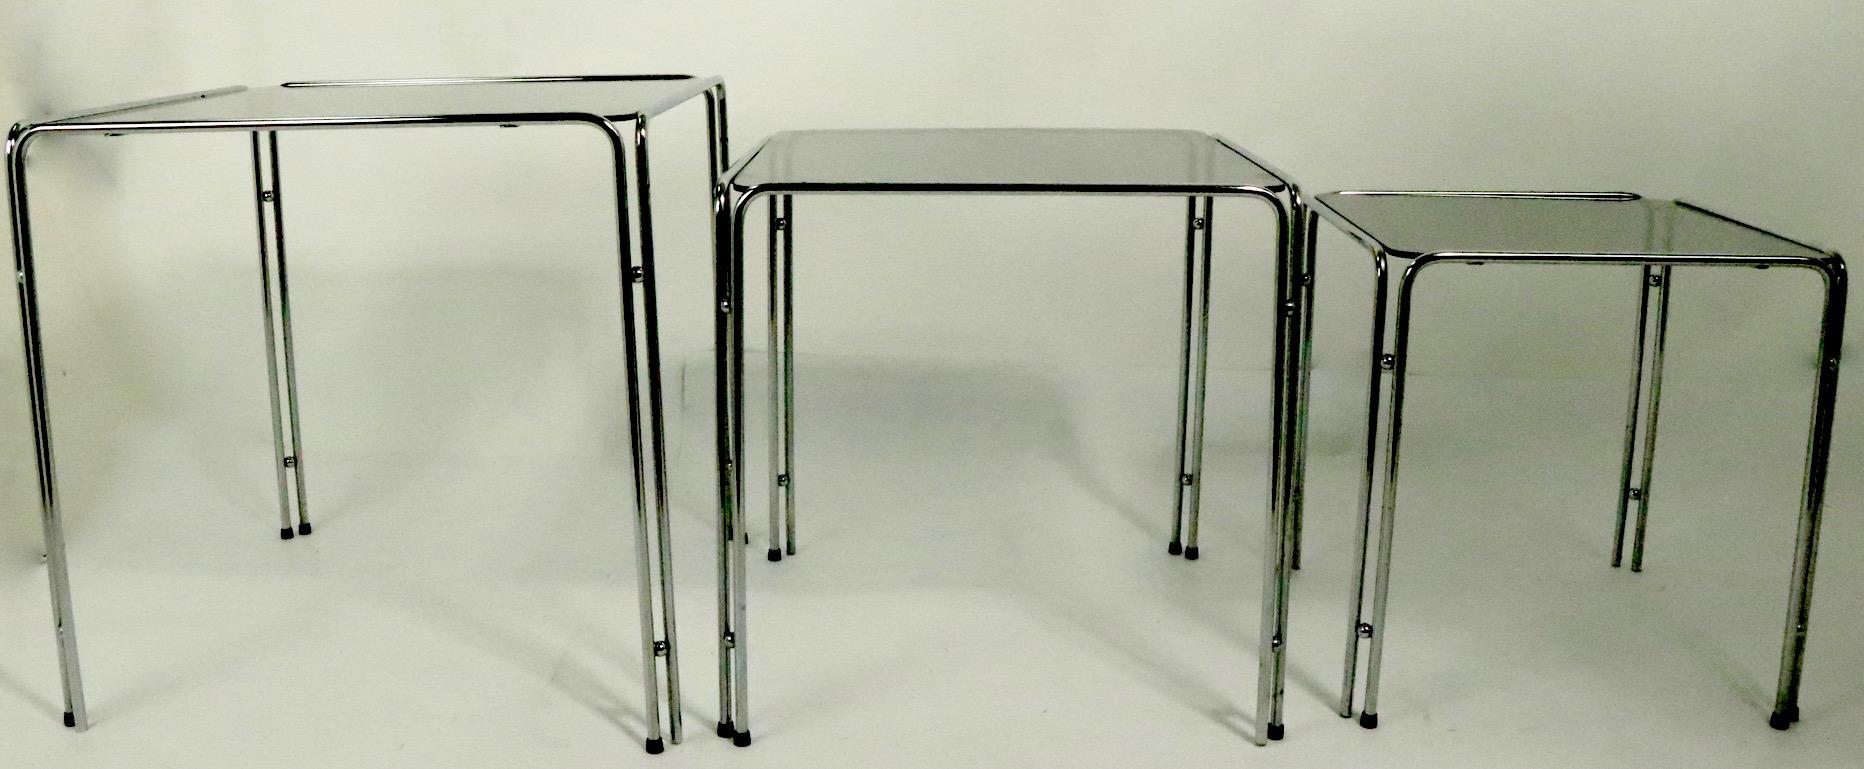 Chrome and Smoked Glass Nesting Tables after Baughman 1